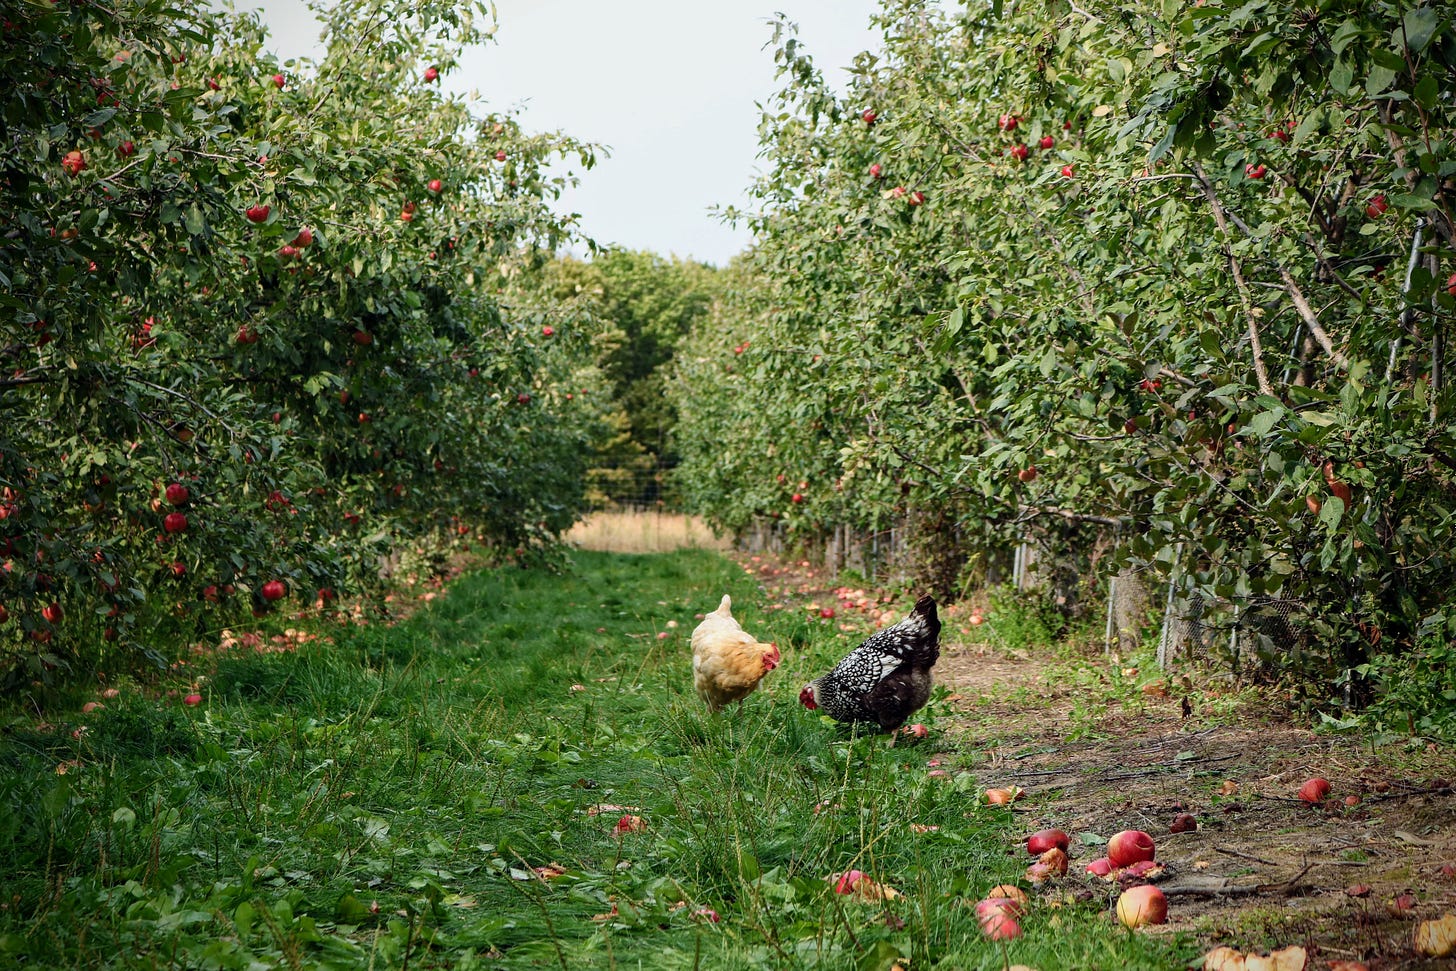 Chickens pecking the ground in an apple orchard